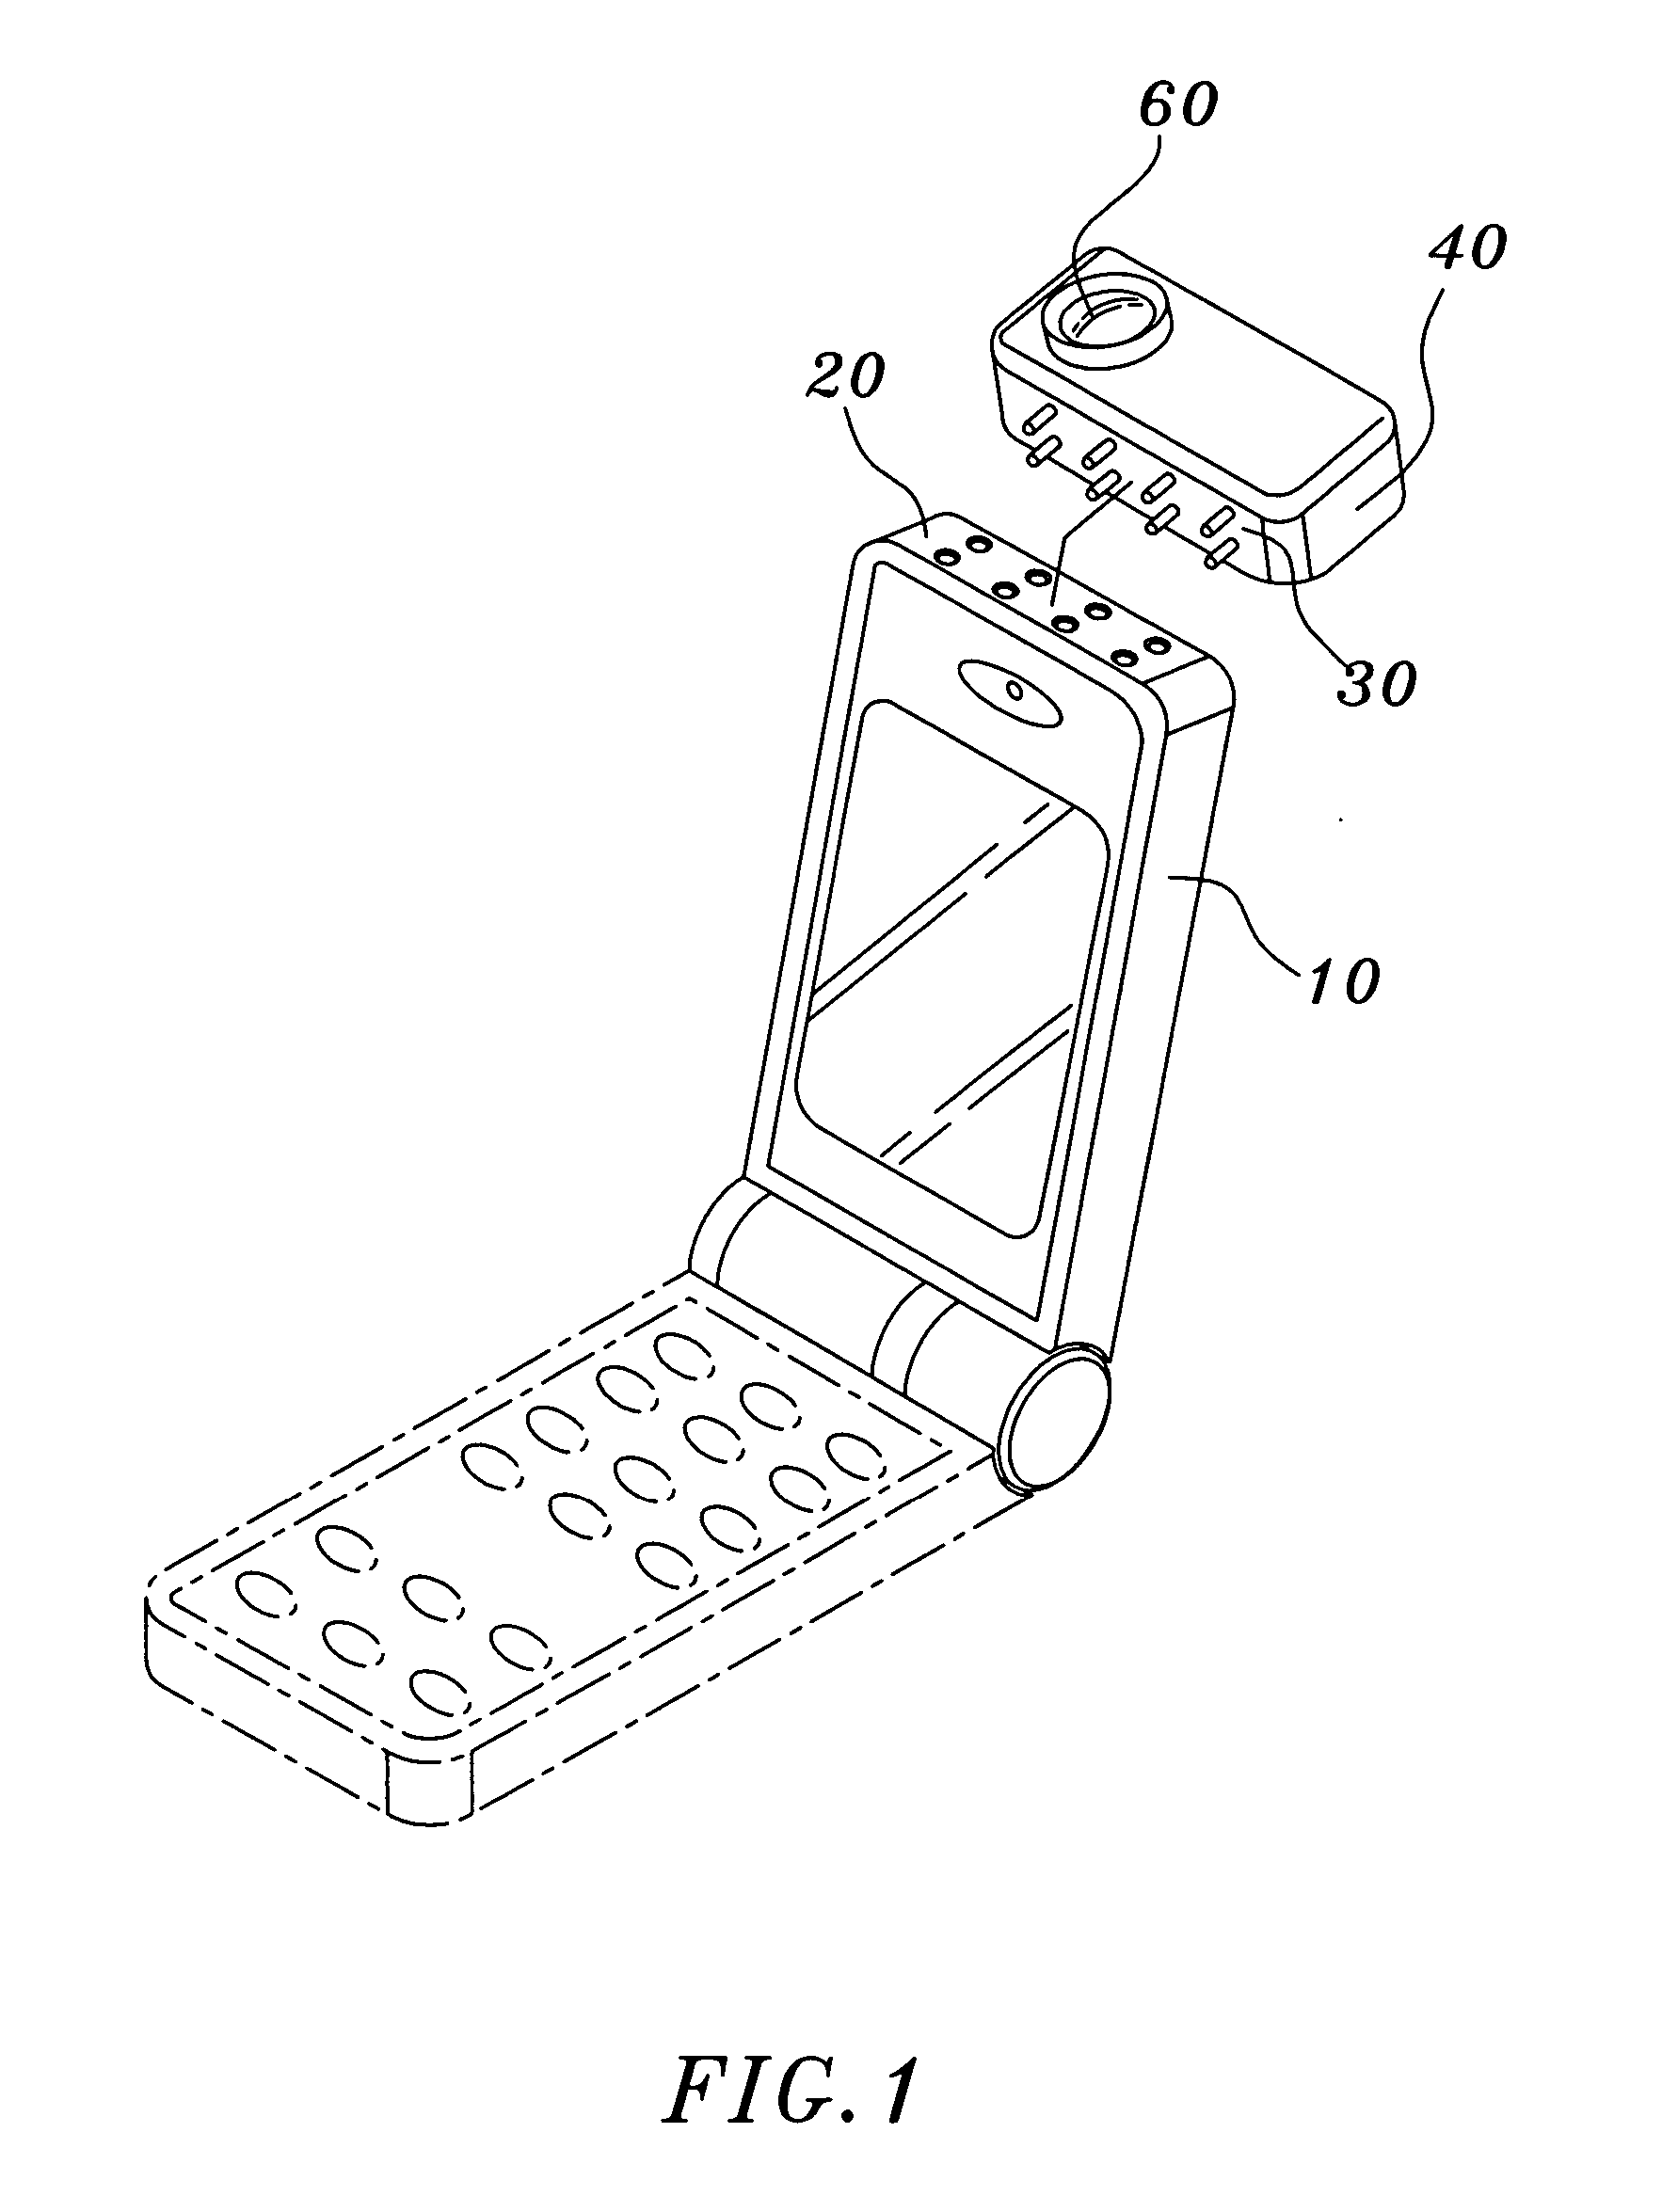 Versatile connector for mobile telephone